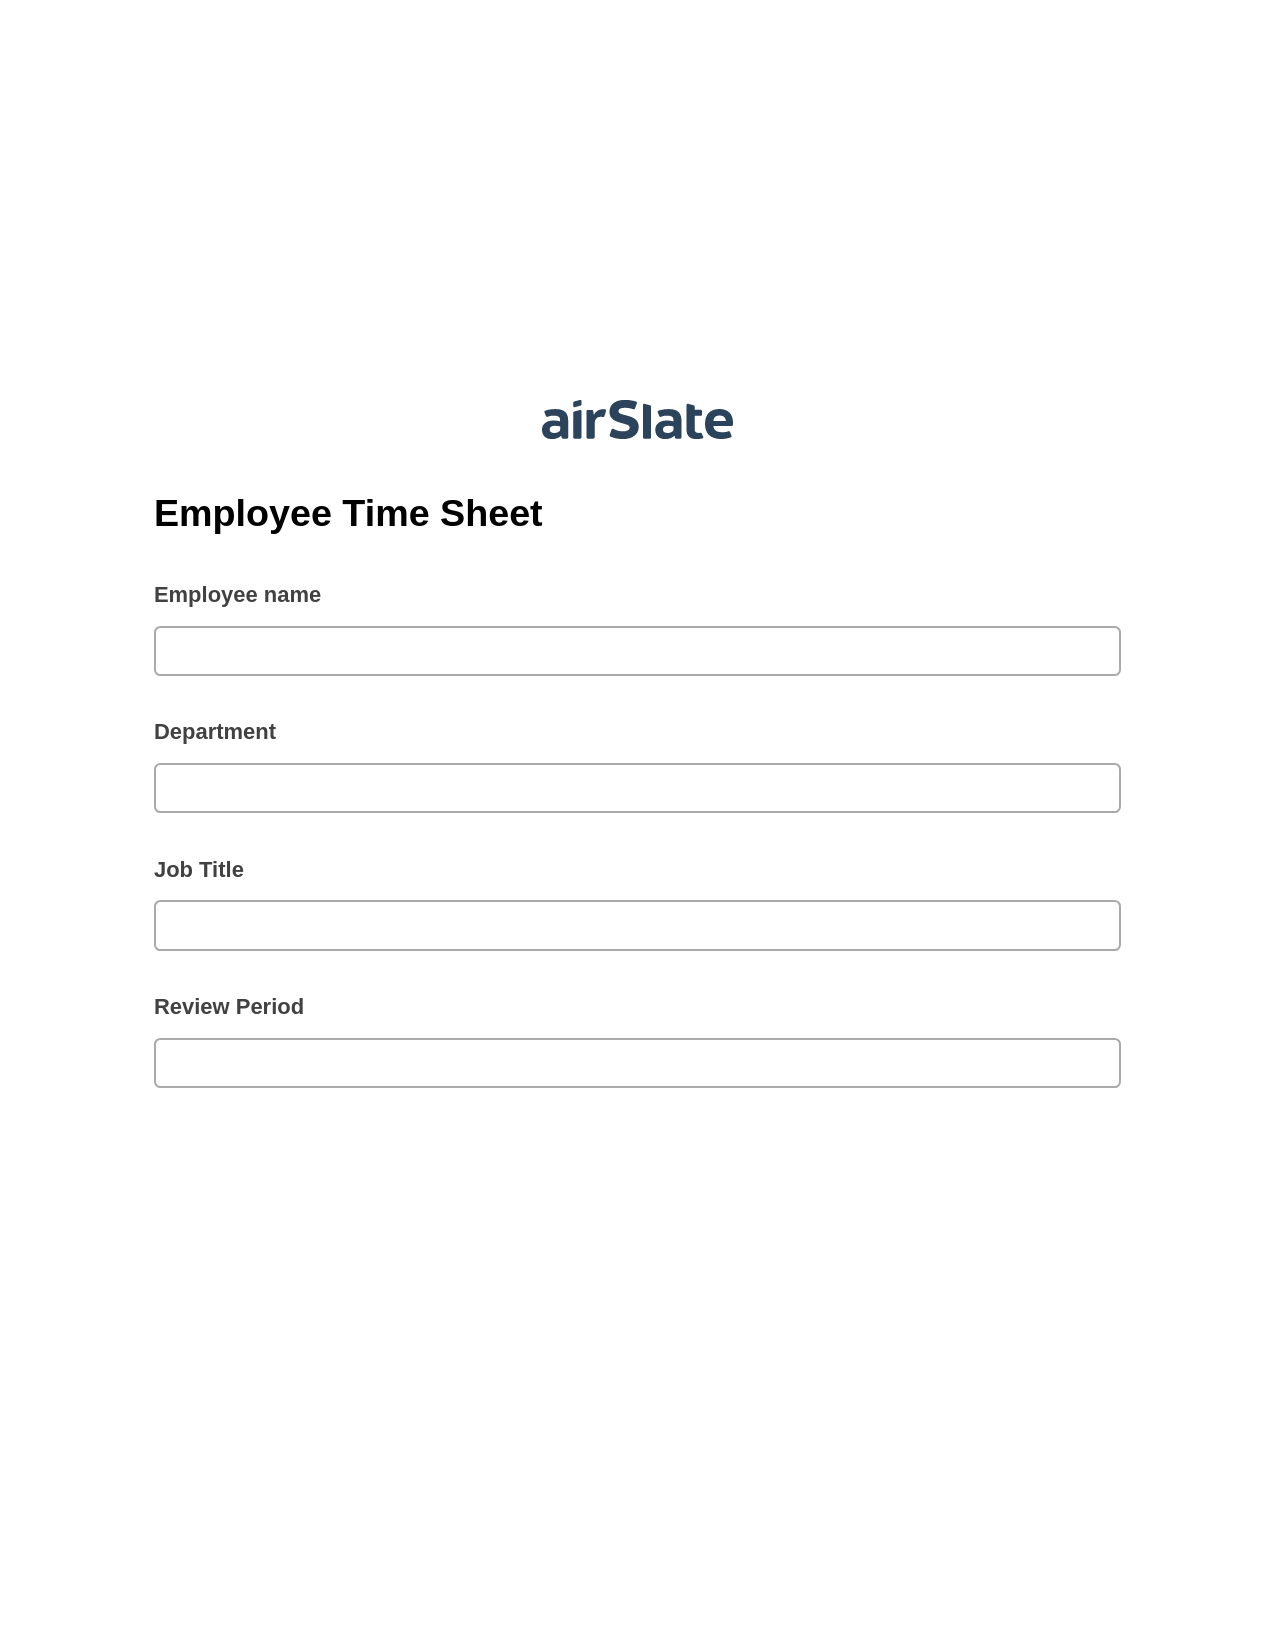 Employee Time Sheet Pre-fill Document Bot, Create slate addon, Archive to Dropbox Bot